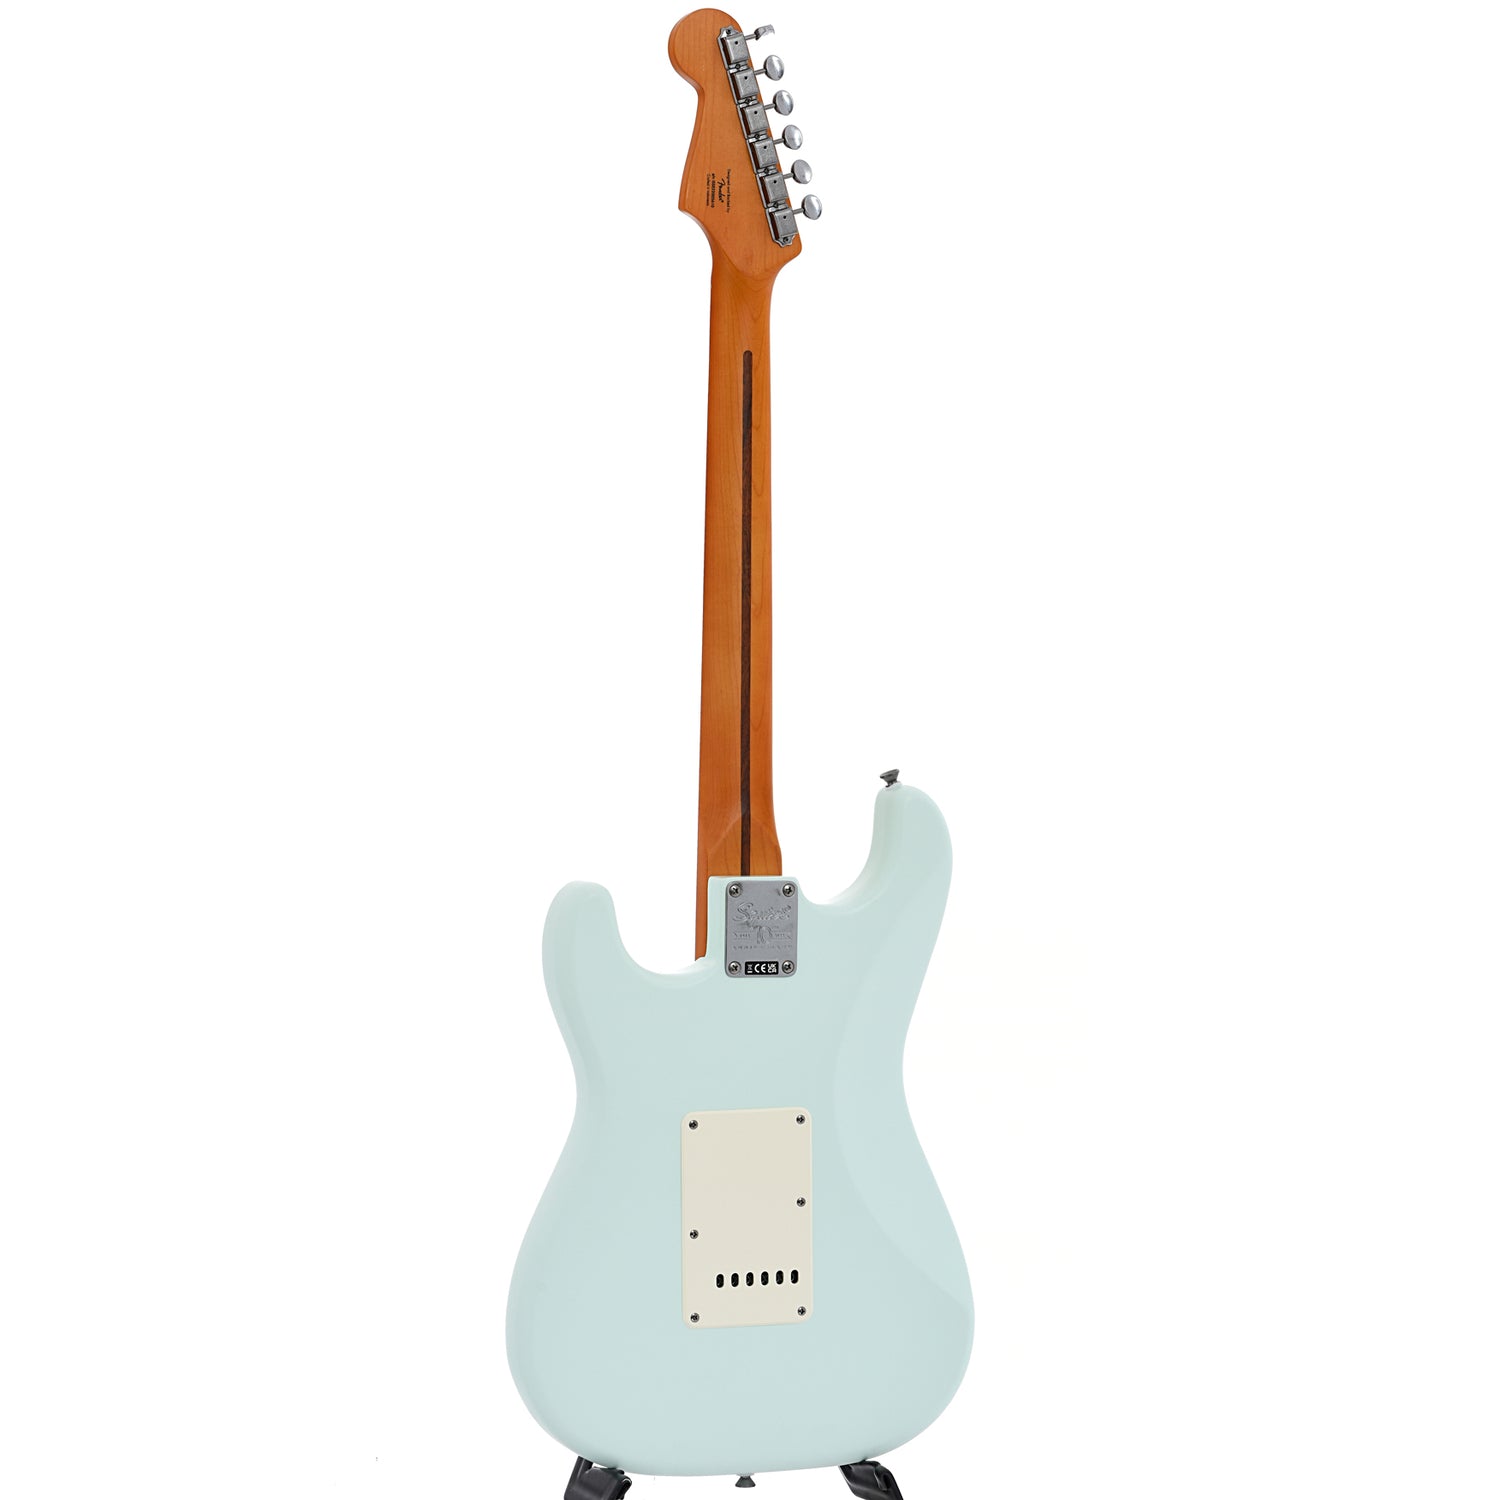 Full back and side of Squier 40th Anniversary Stratocaster, Vintage Edition, Satin Sonic Blue